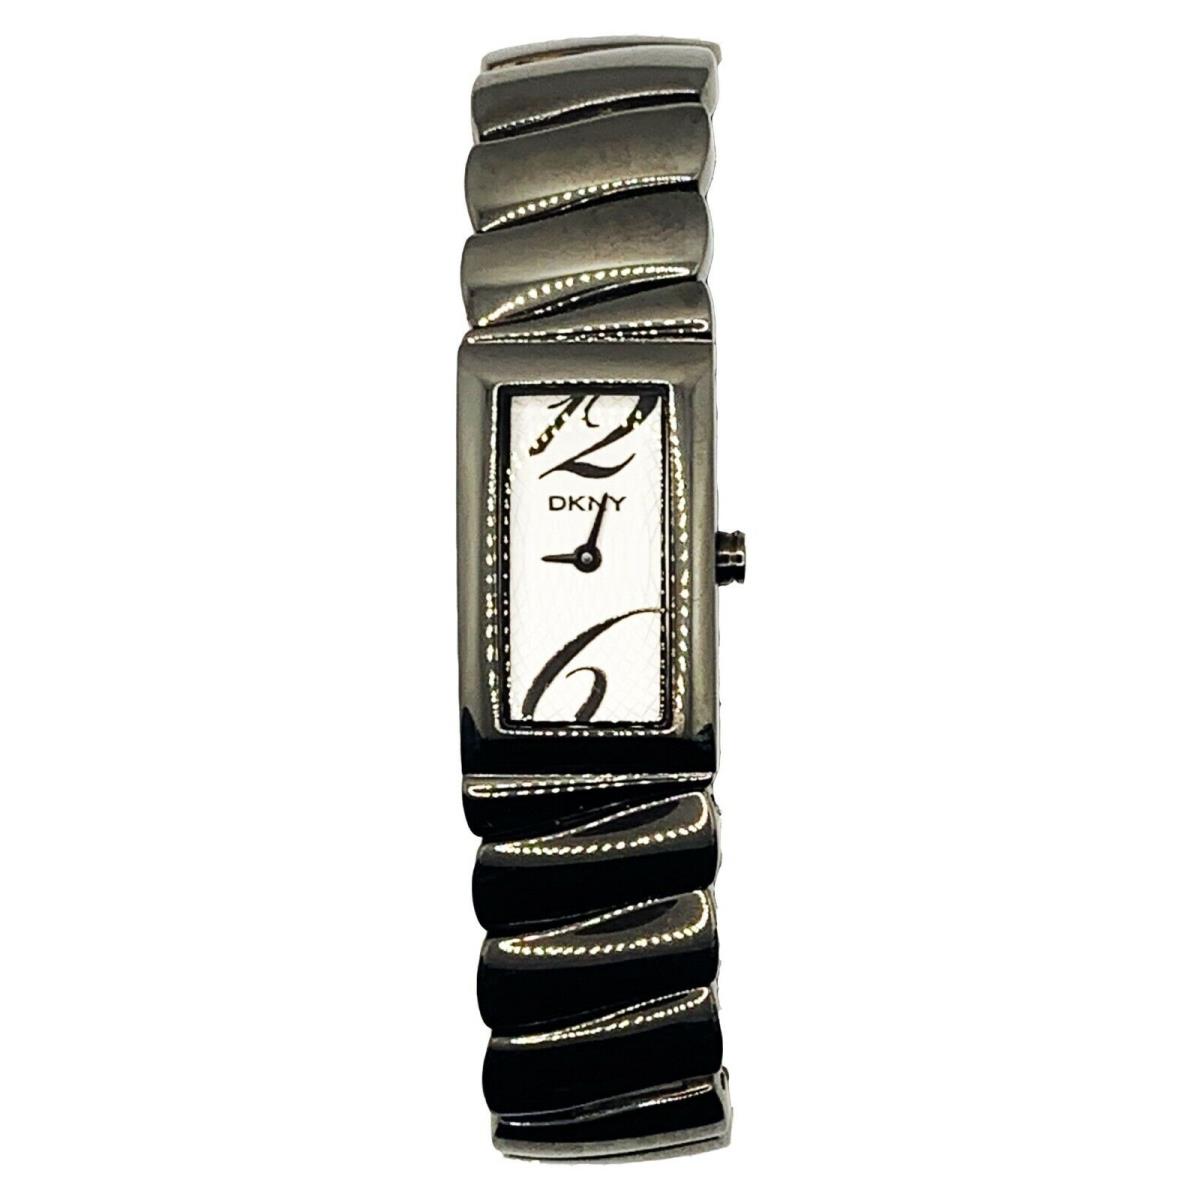 DKNY watch Double - Brown Dial, Gray Band, Brown Bezel